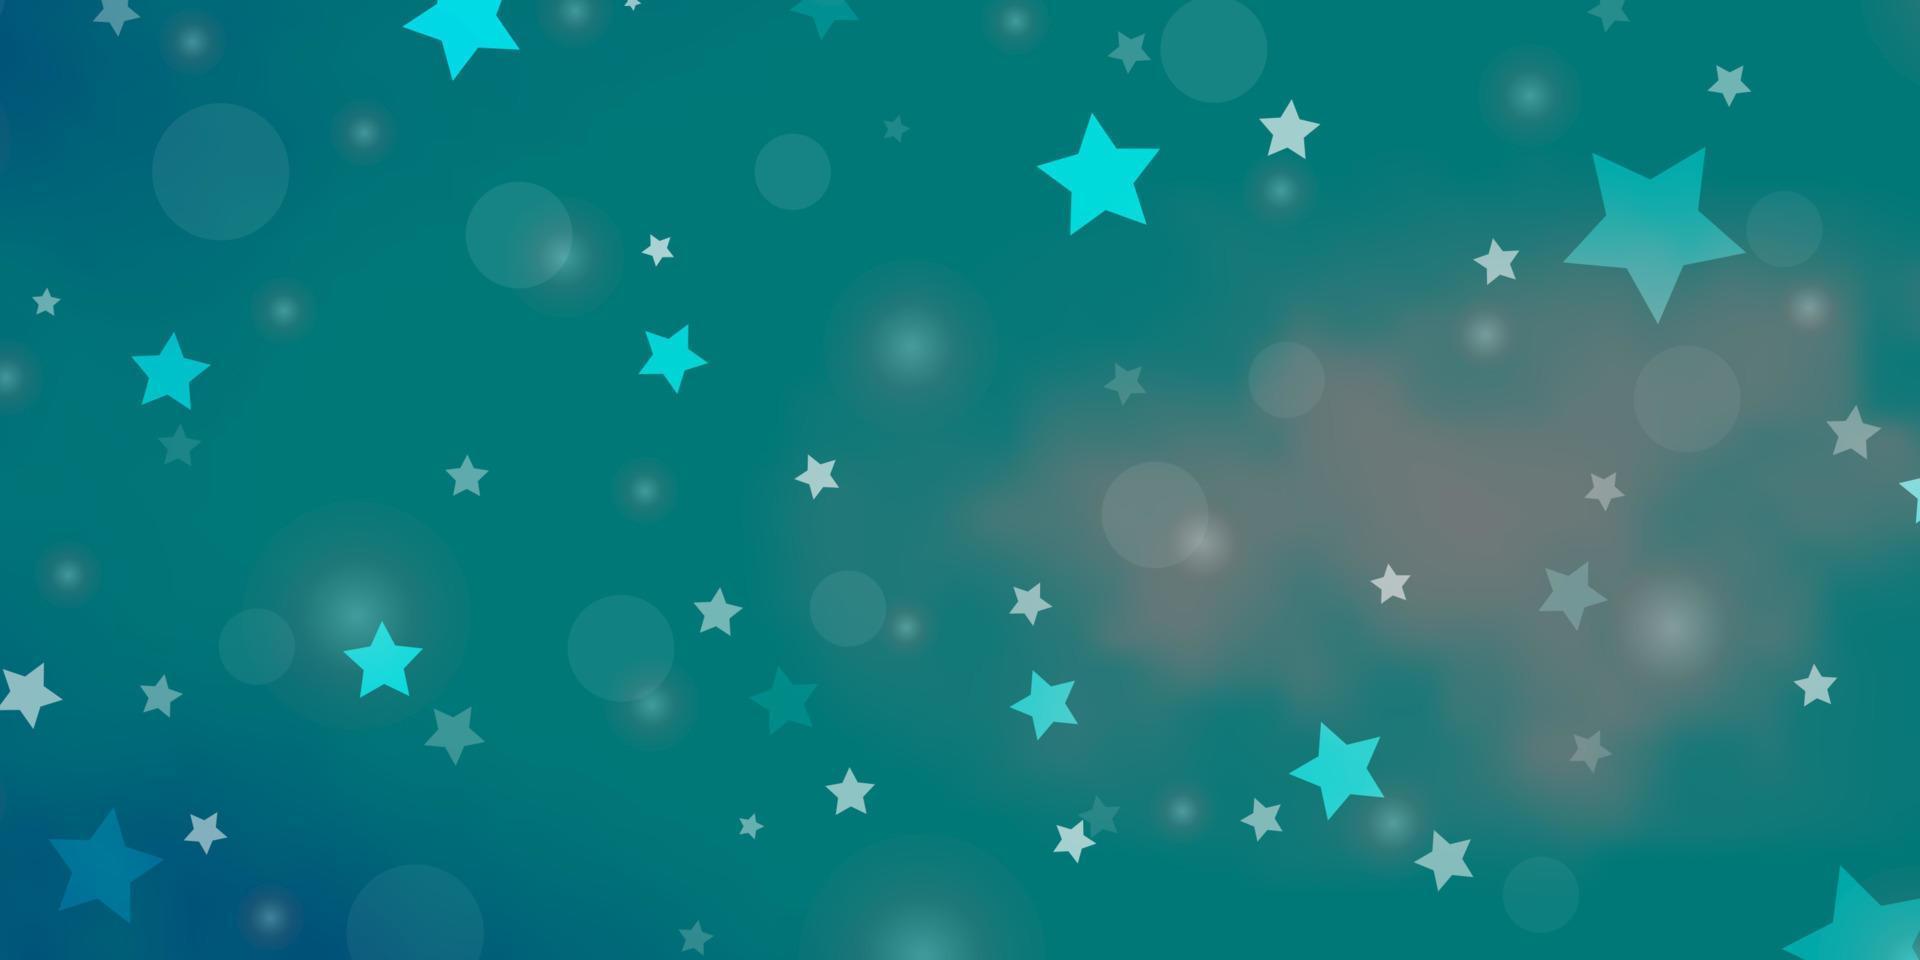 Light Blue, Green vector template with circles, stars.